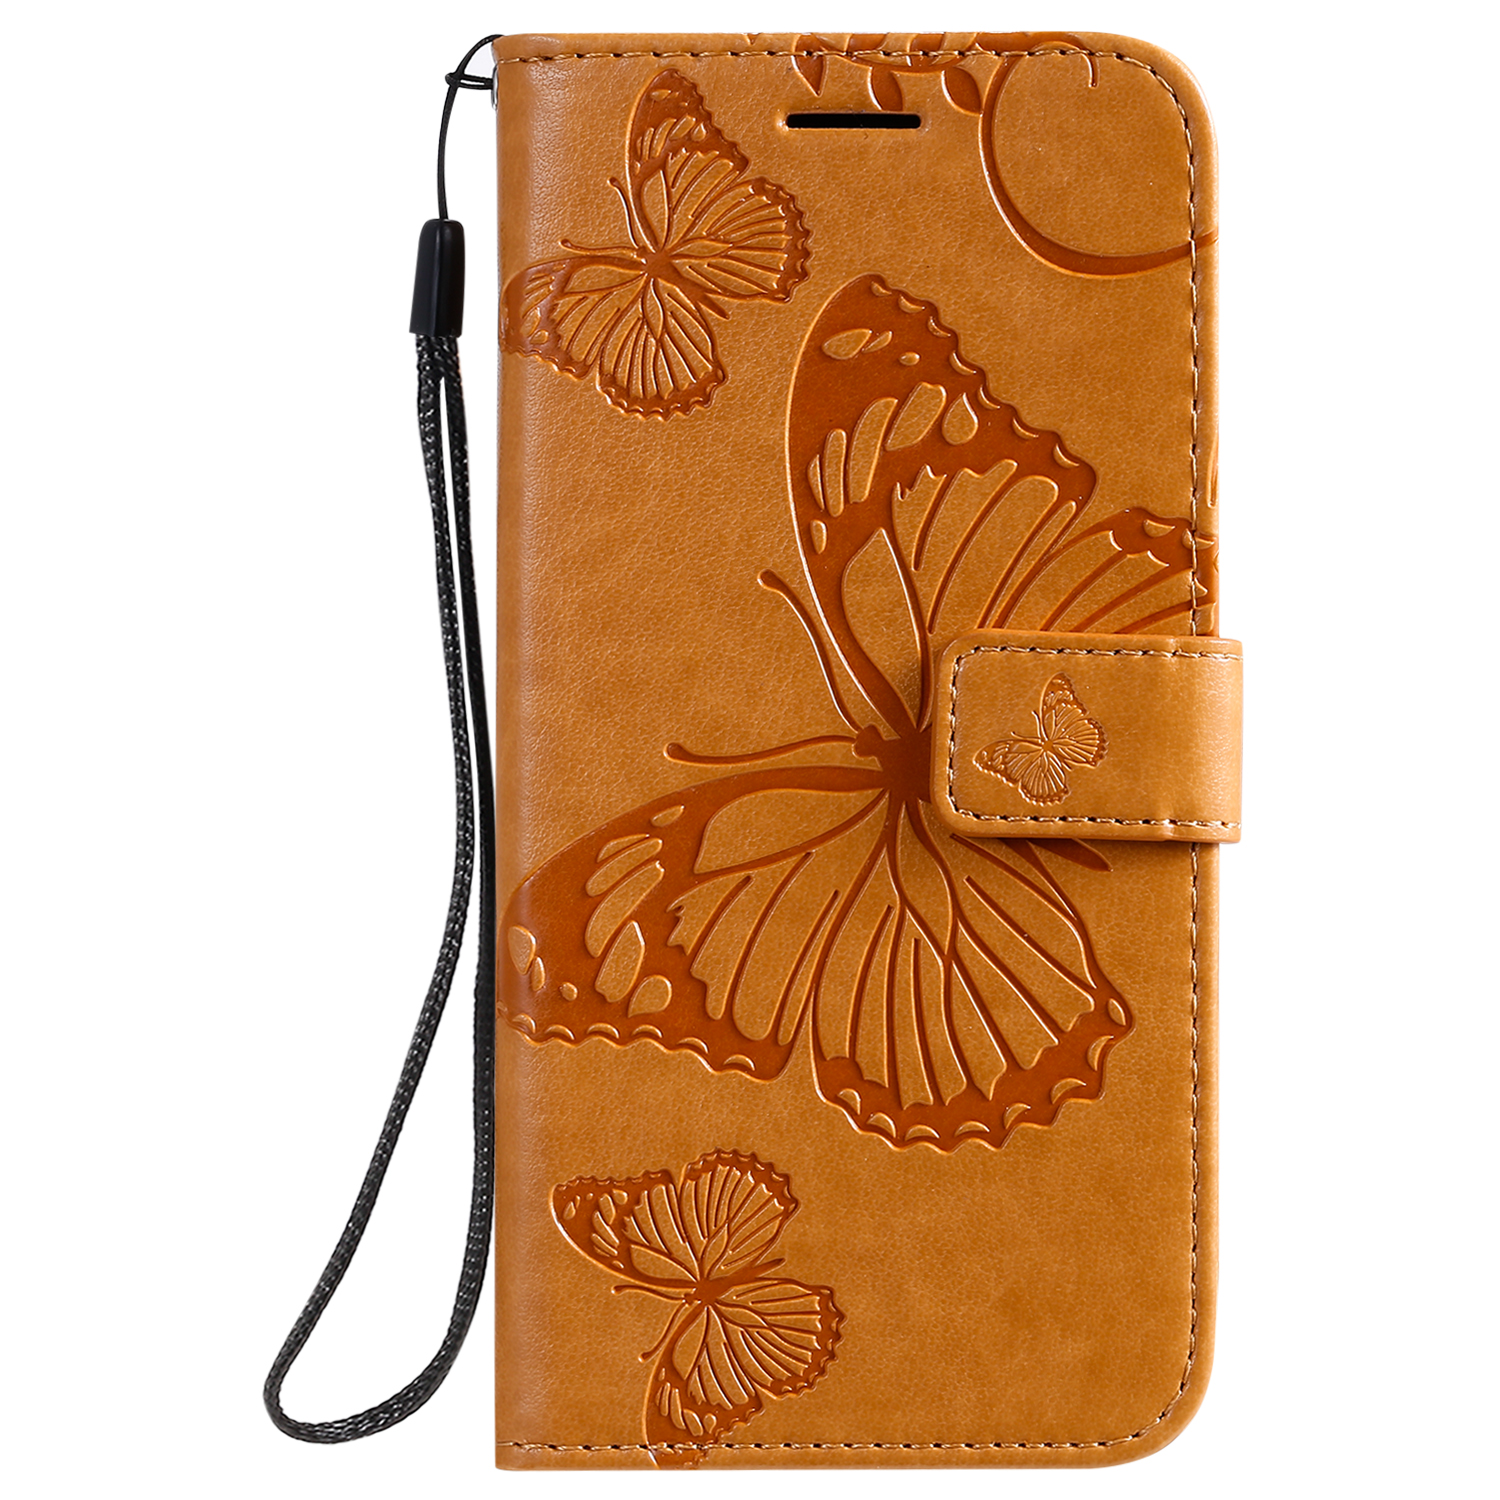 Galaxy S20 Ultra 5G Case, S20 Ultra Wallet Case, Allytech Pretty Retro Embossed Butterfly PU Leather Book Style Protection Slim Folio Flip Case Cover for Samsung Galaxy S20 Ultra 6.9", Yellow - image 1 of 1